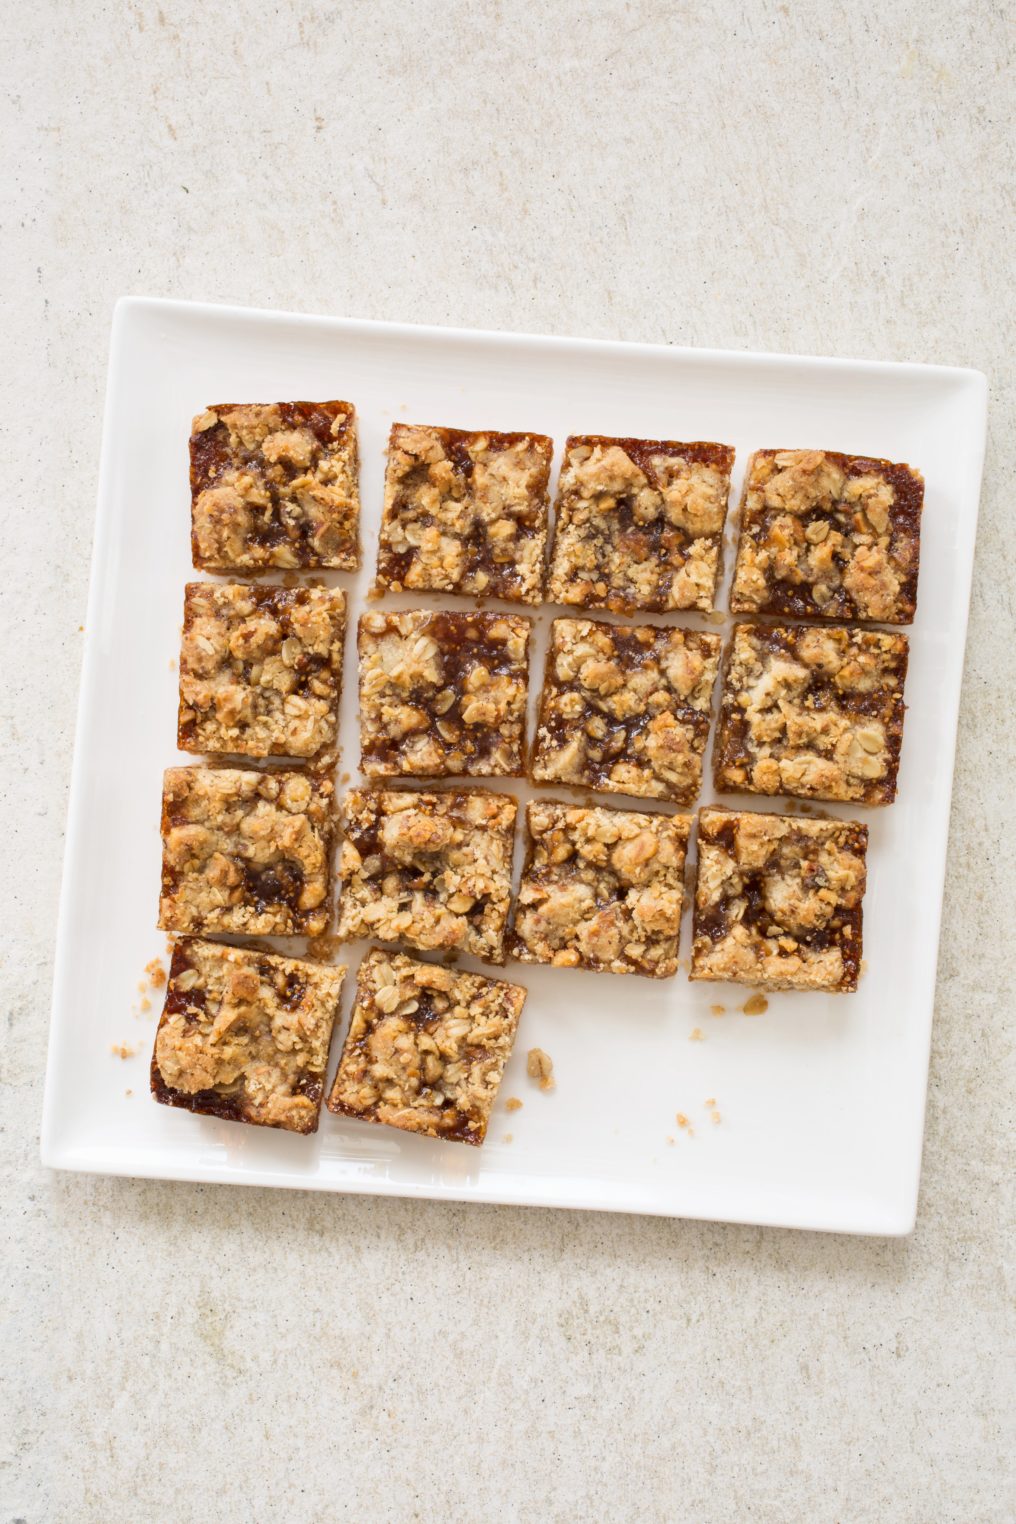 Streusel Fig Bars are the best fig bars! Crumbly streusel tops warm sweetened fig filling baked until jammy. Take them to a potluck or try them for dessert.